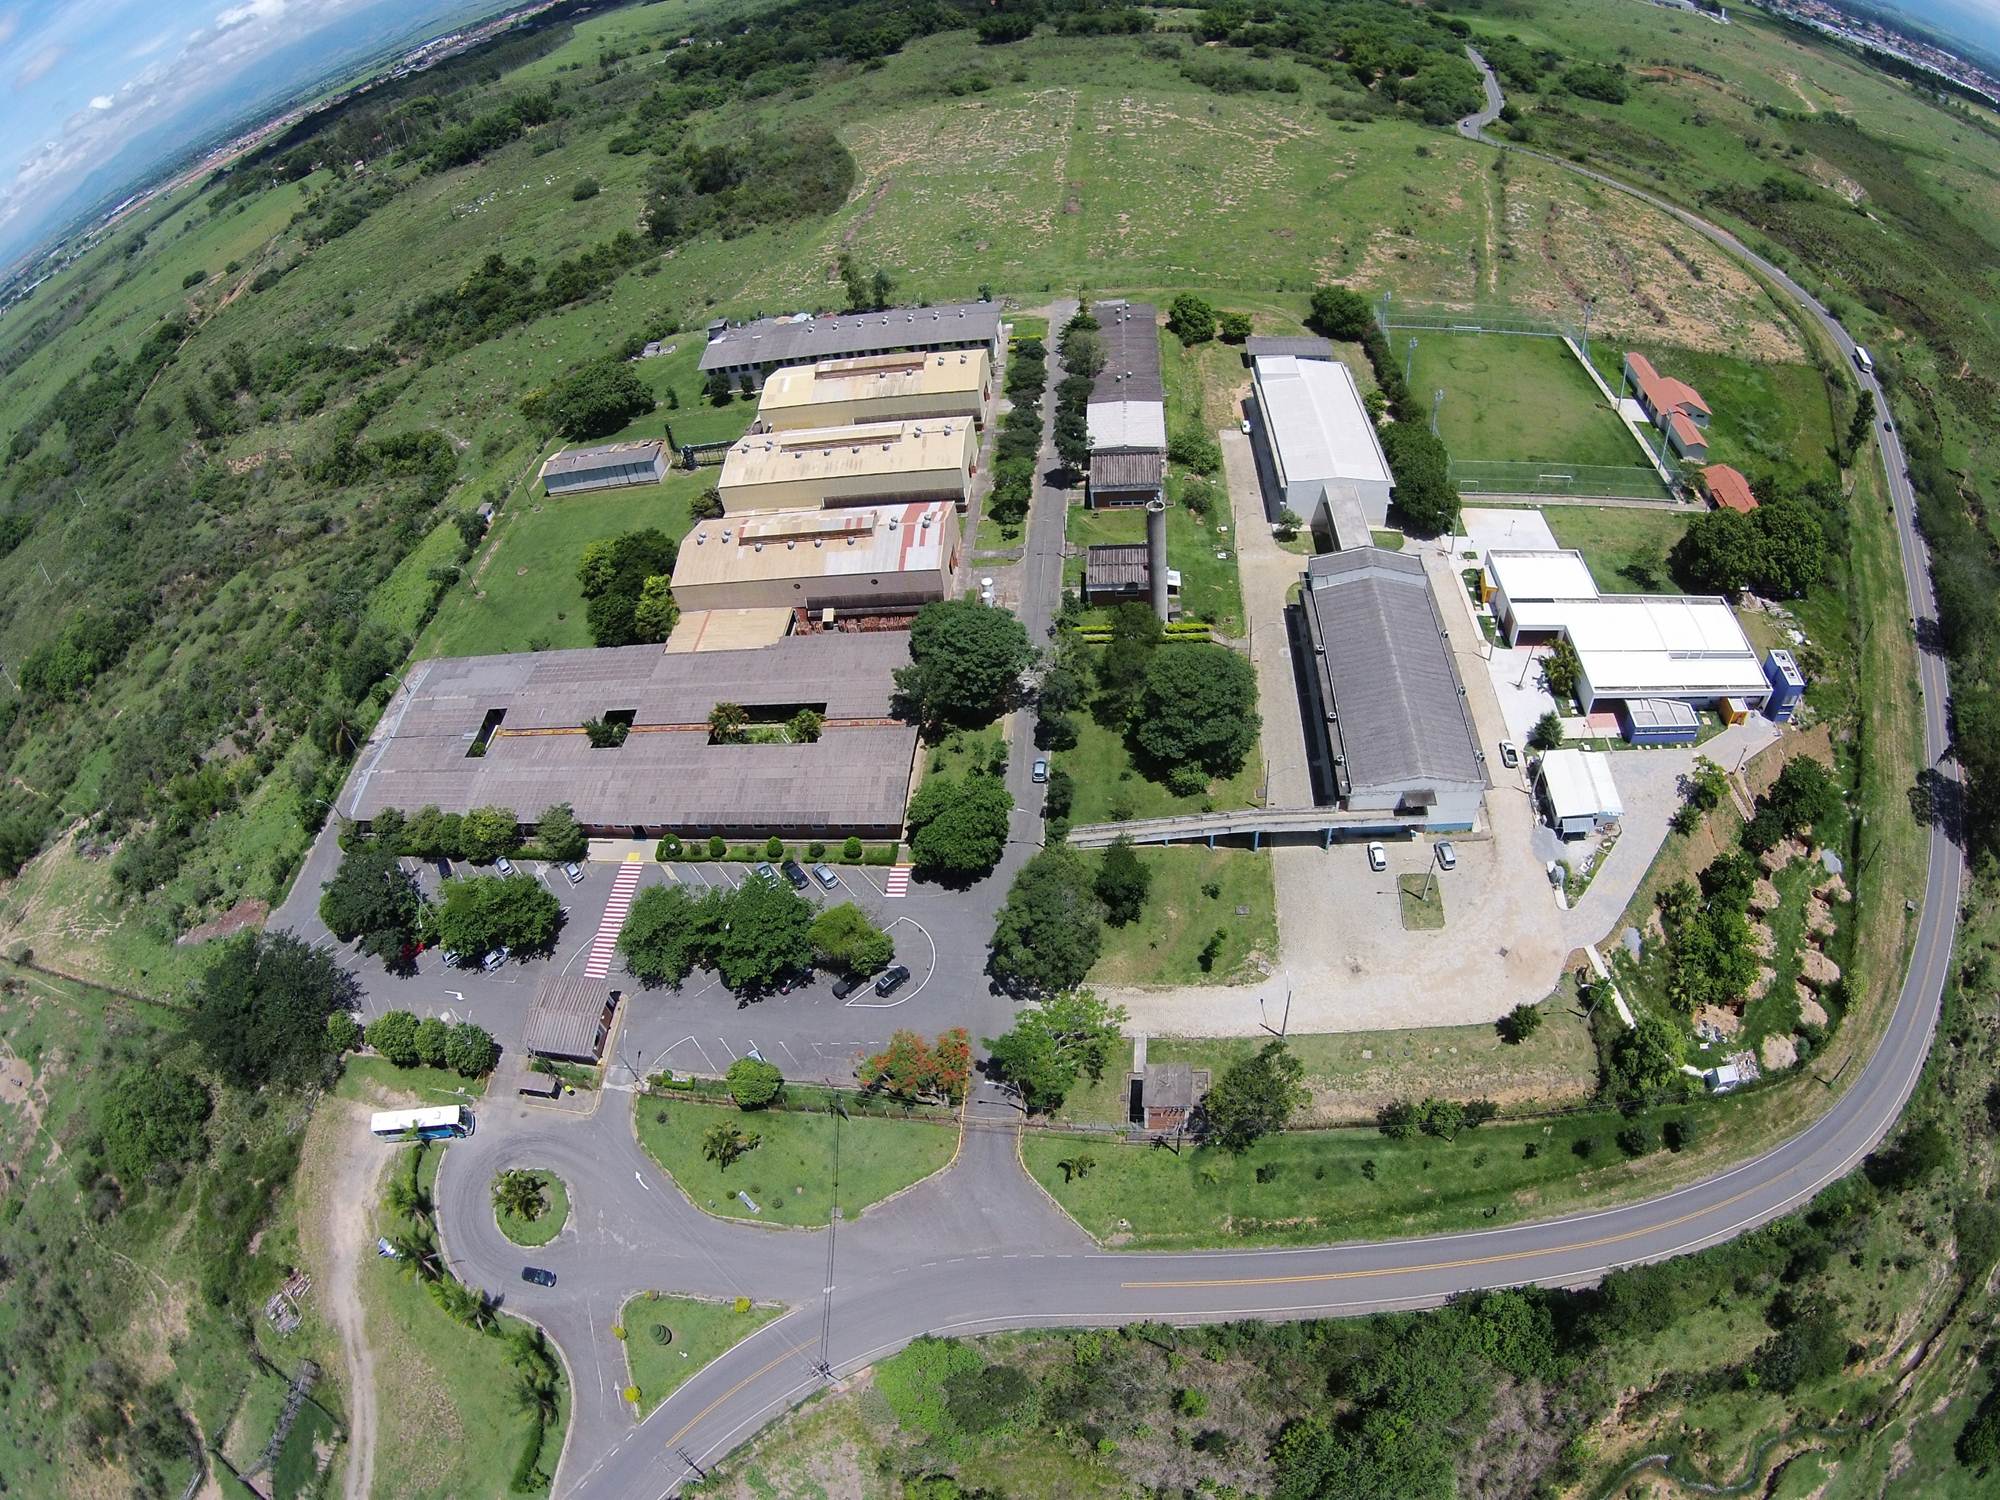 Bird's eye view of the department